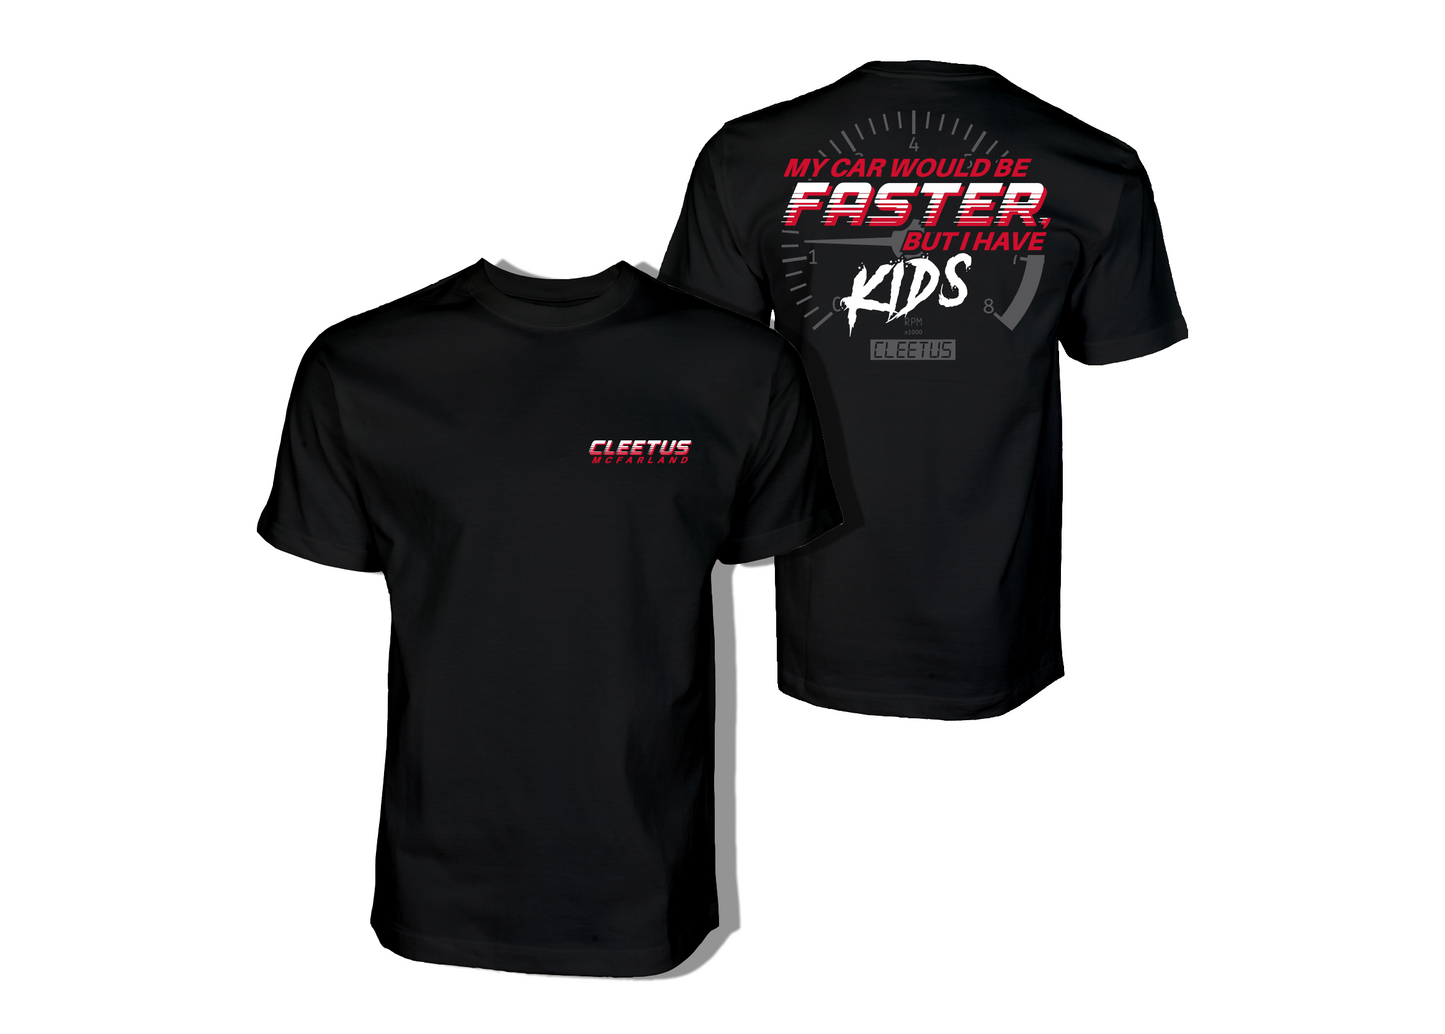 My Car Would be Faster Shirt